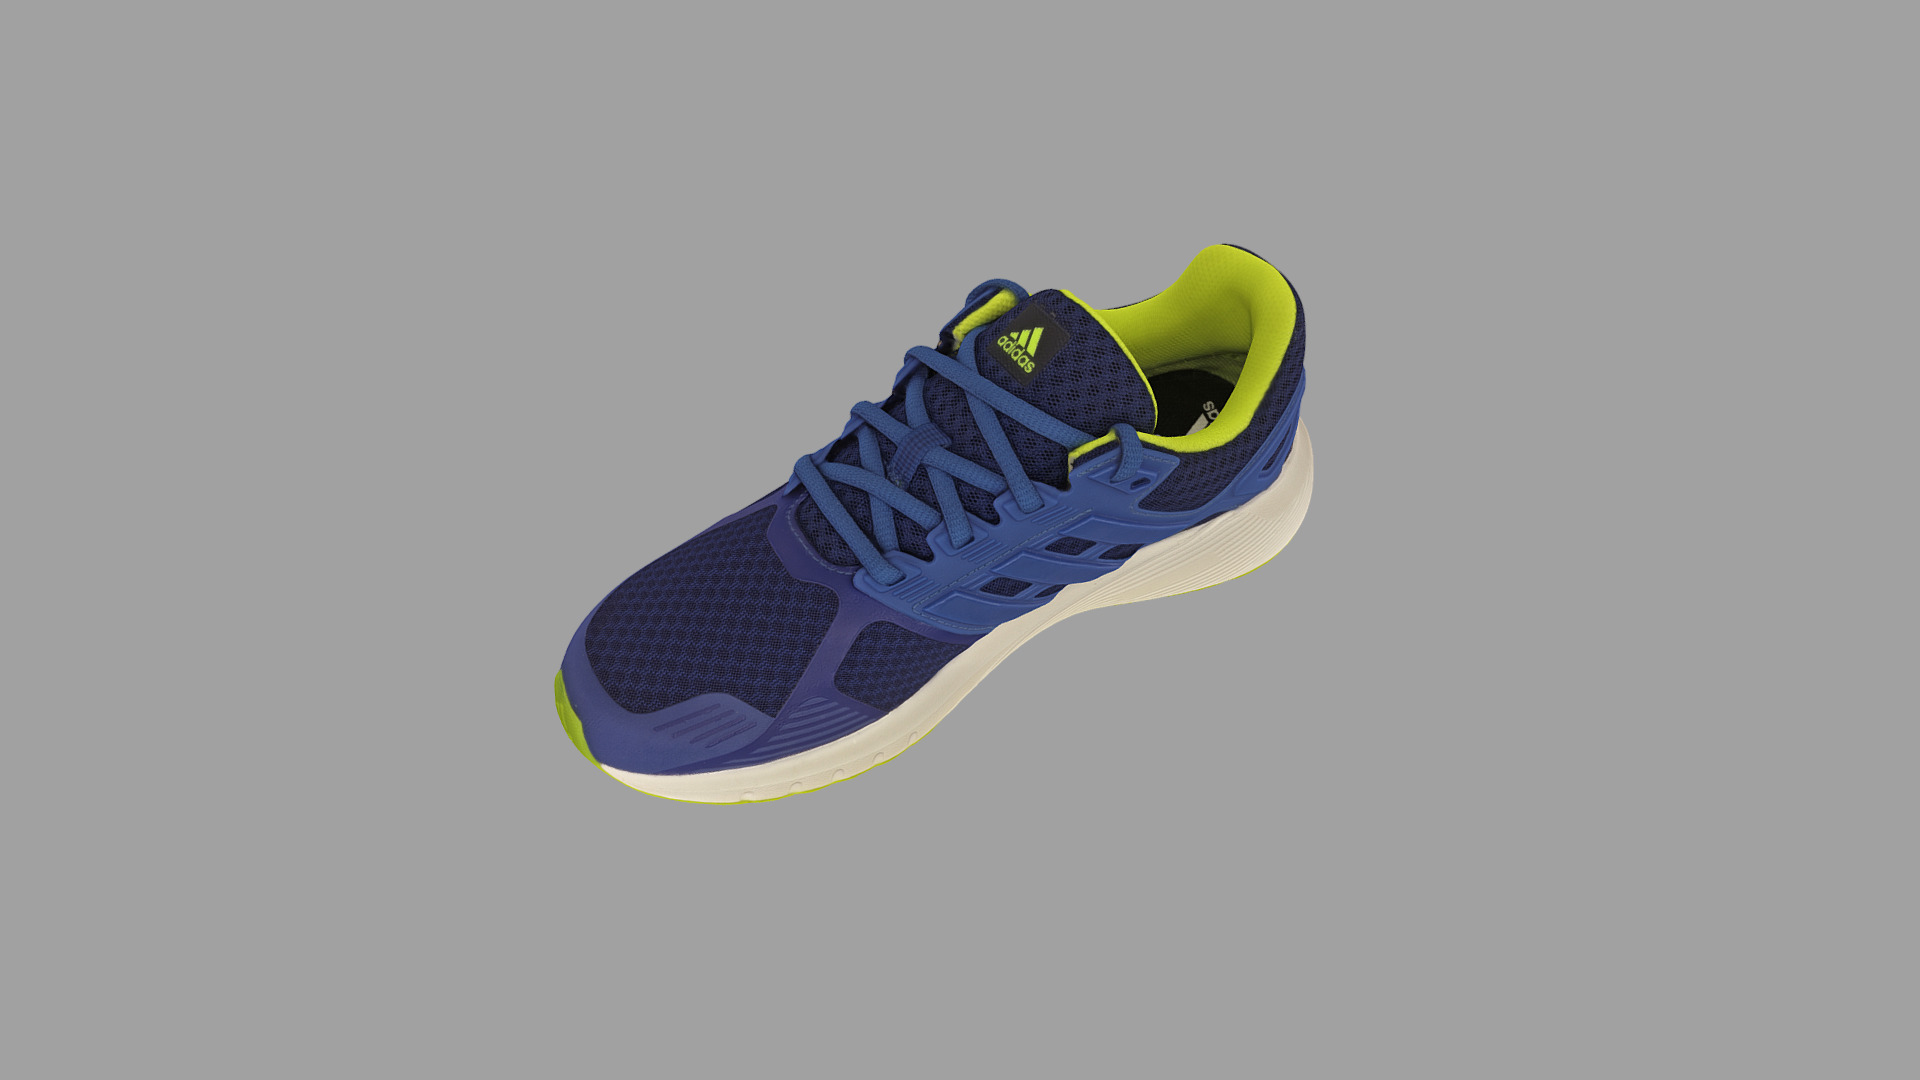 3D model Adidas Sport Shoe - This is a 3D model of the Adidas Sport Shoe. The 3D model is about a black and yellow shoe.